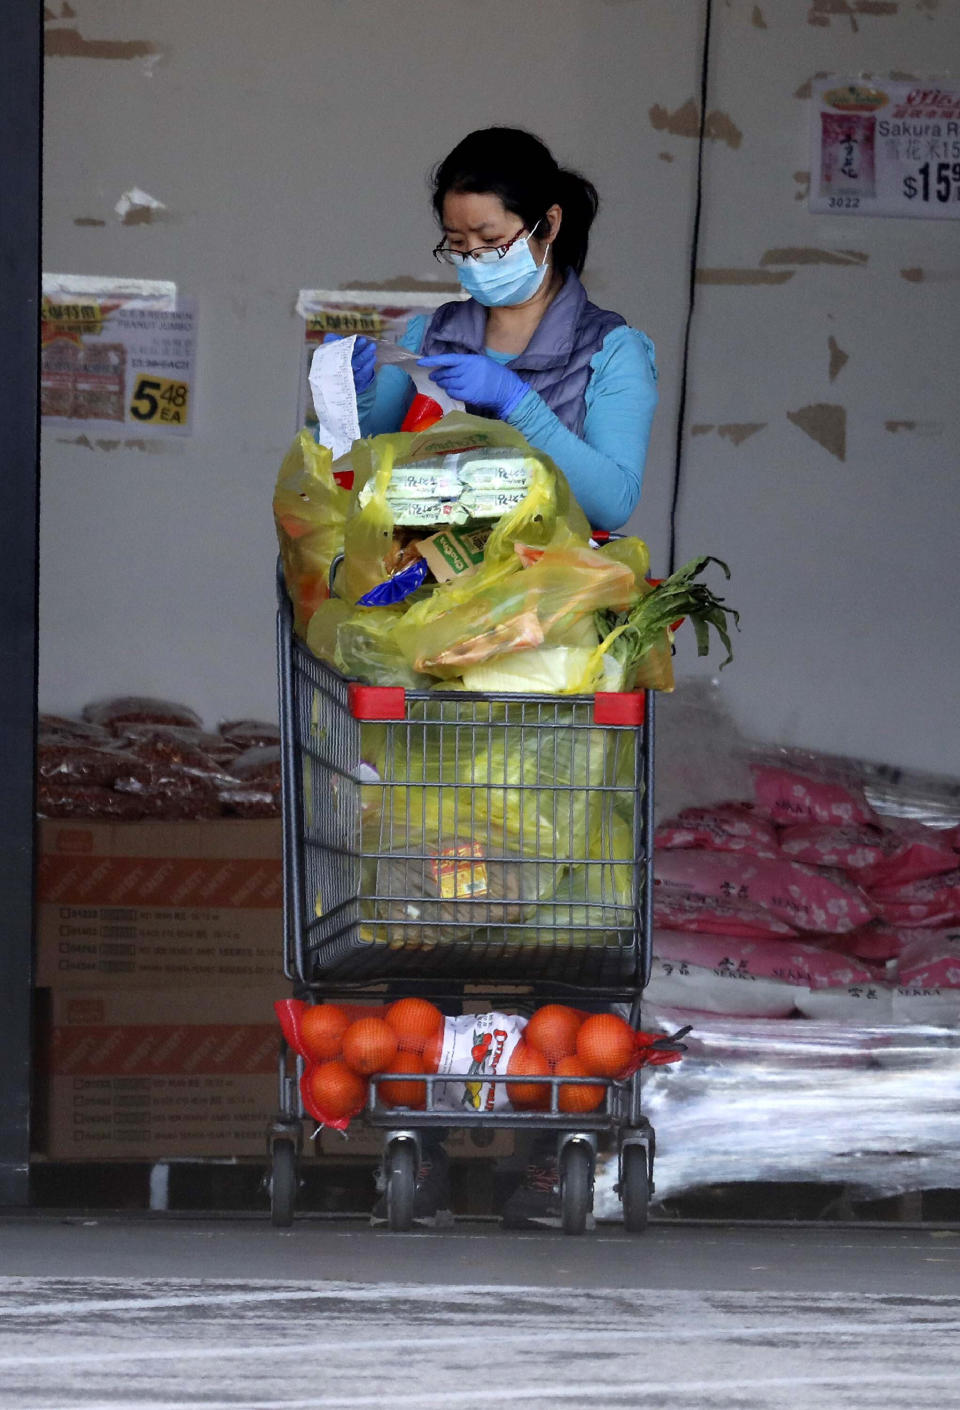 Wearing a mask amid concerns of the spread of COVID-19, a woman checks her receipt after shopping for groceries in Richardson, Texas, Wednesday, April 1, 2020. (AP Photo/LM Otero)